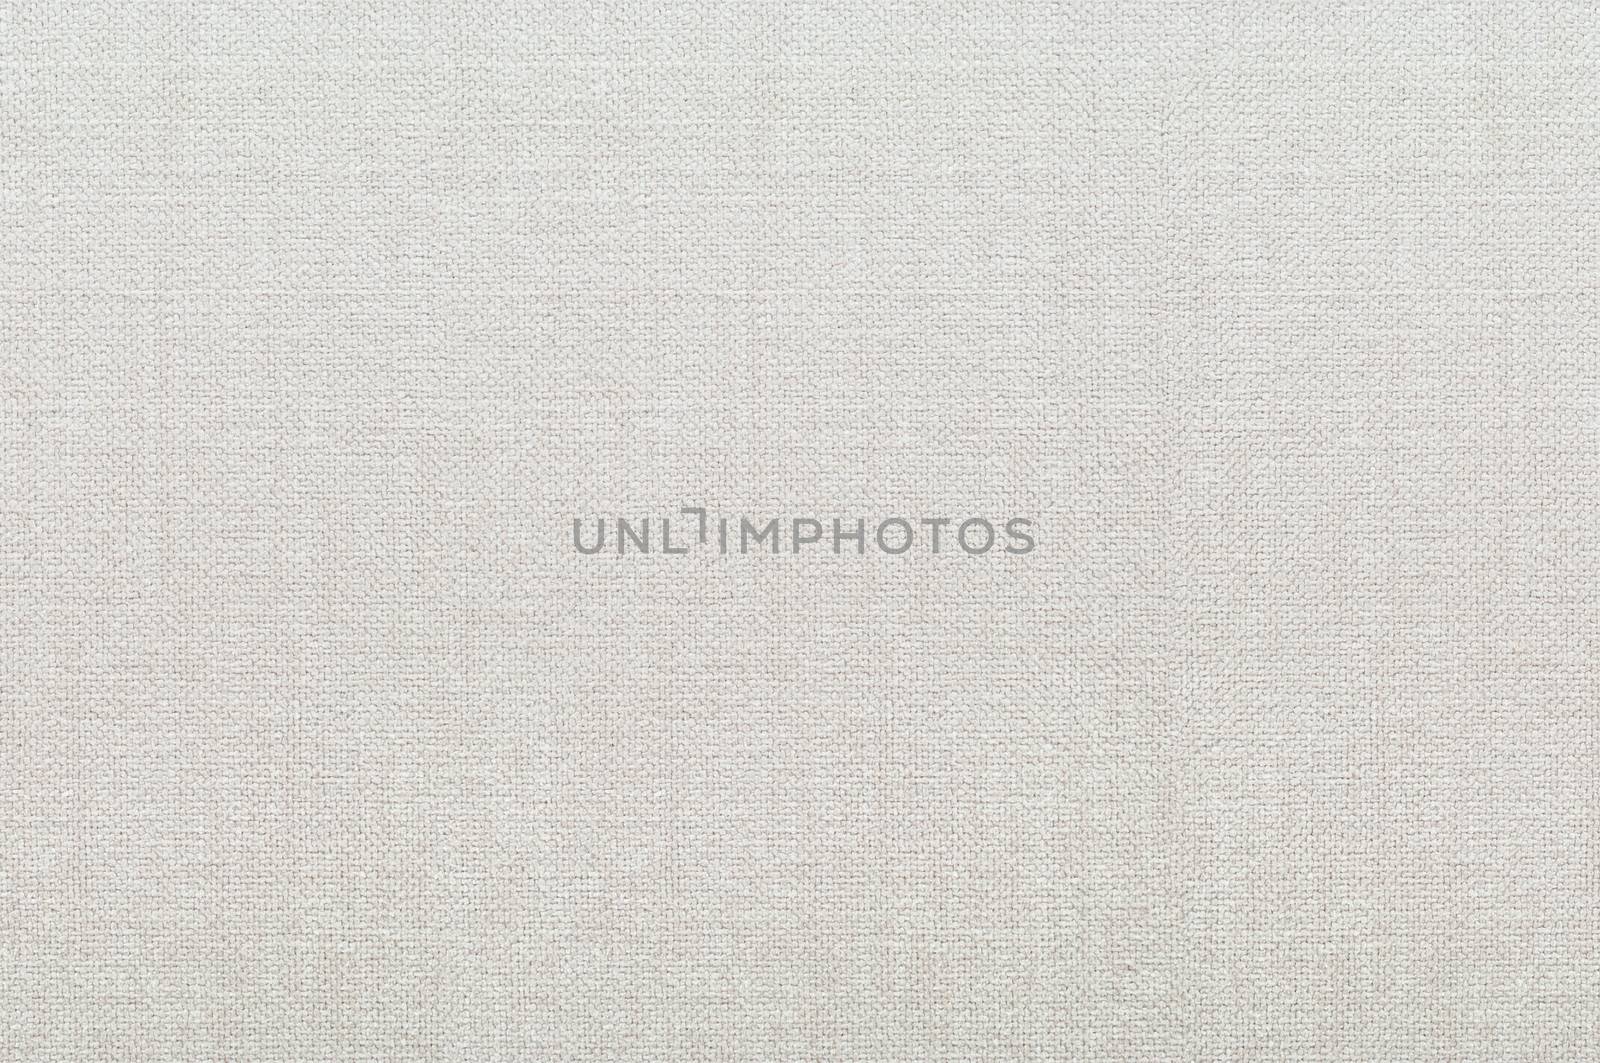 Woven gray fabric as abstract texture background